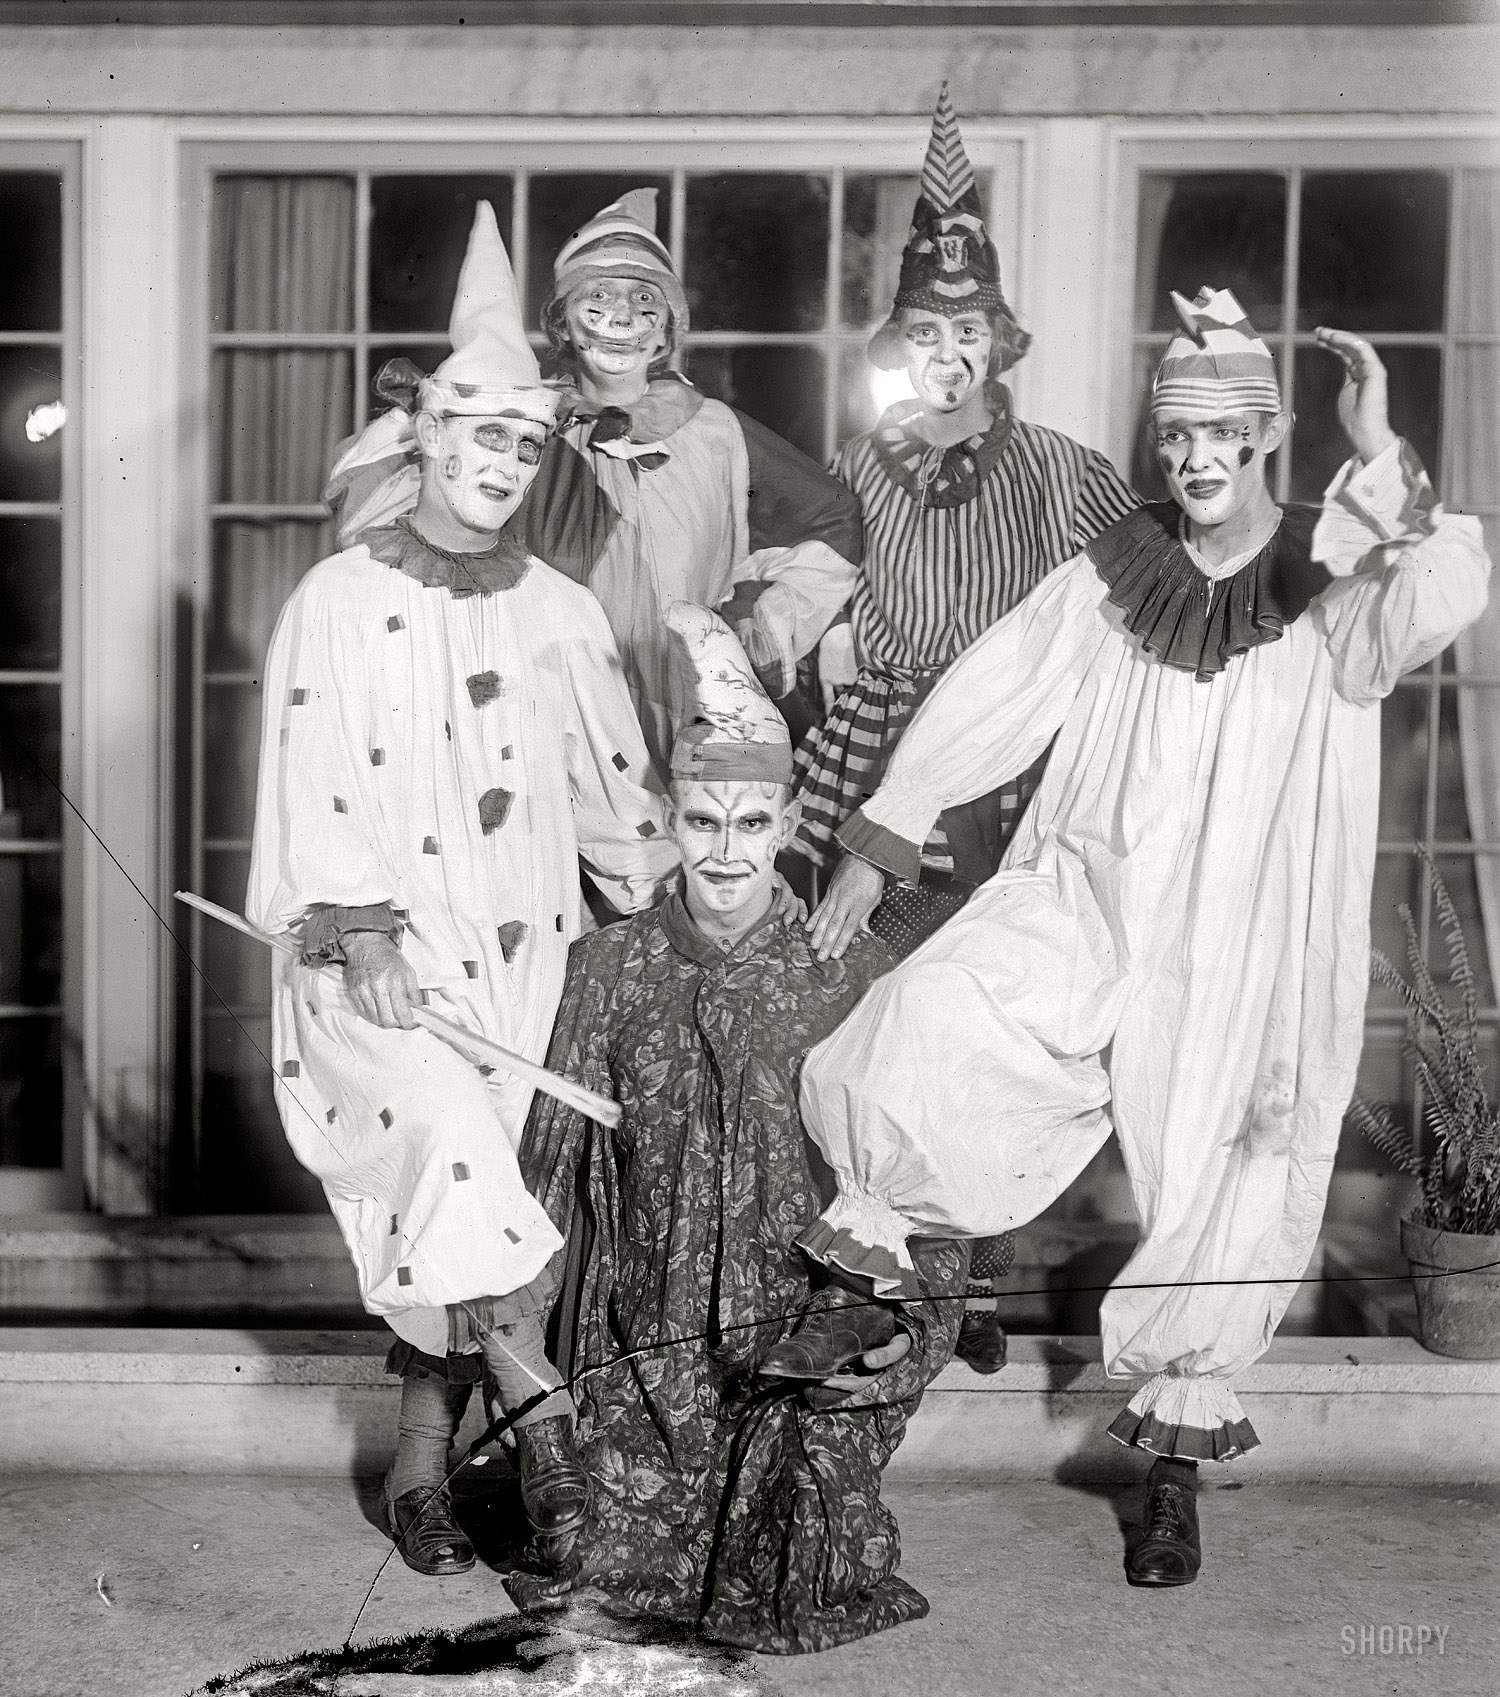 The Clown And His Donkey [1910]